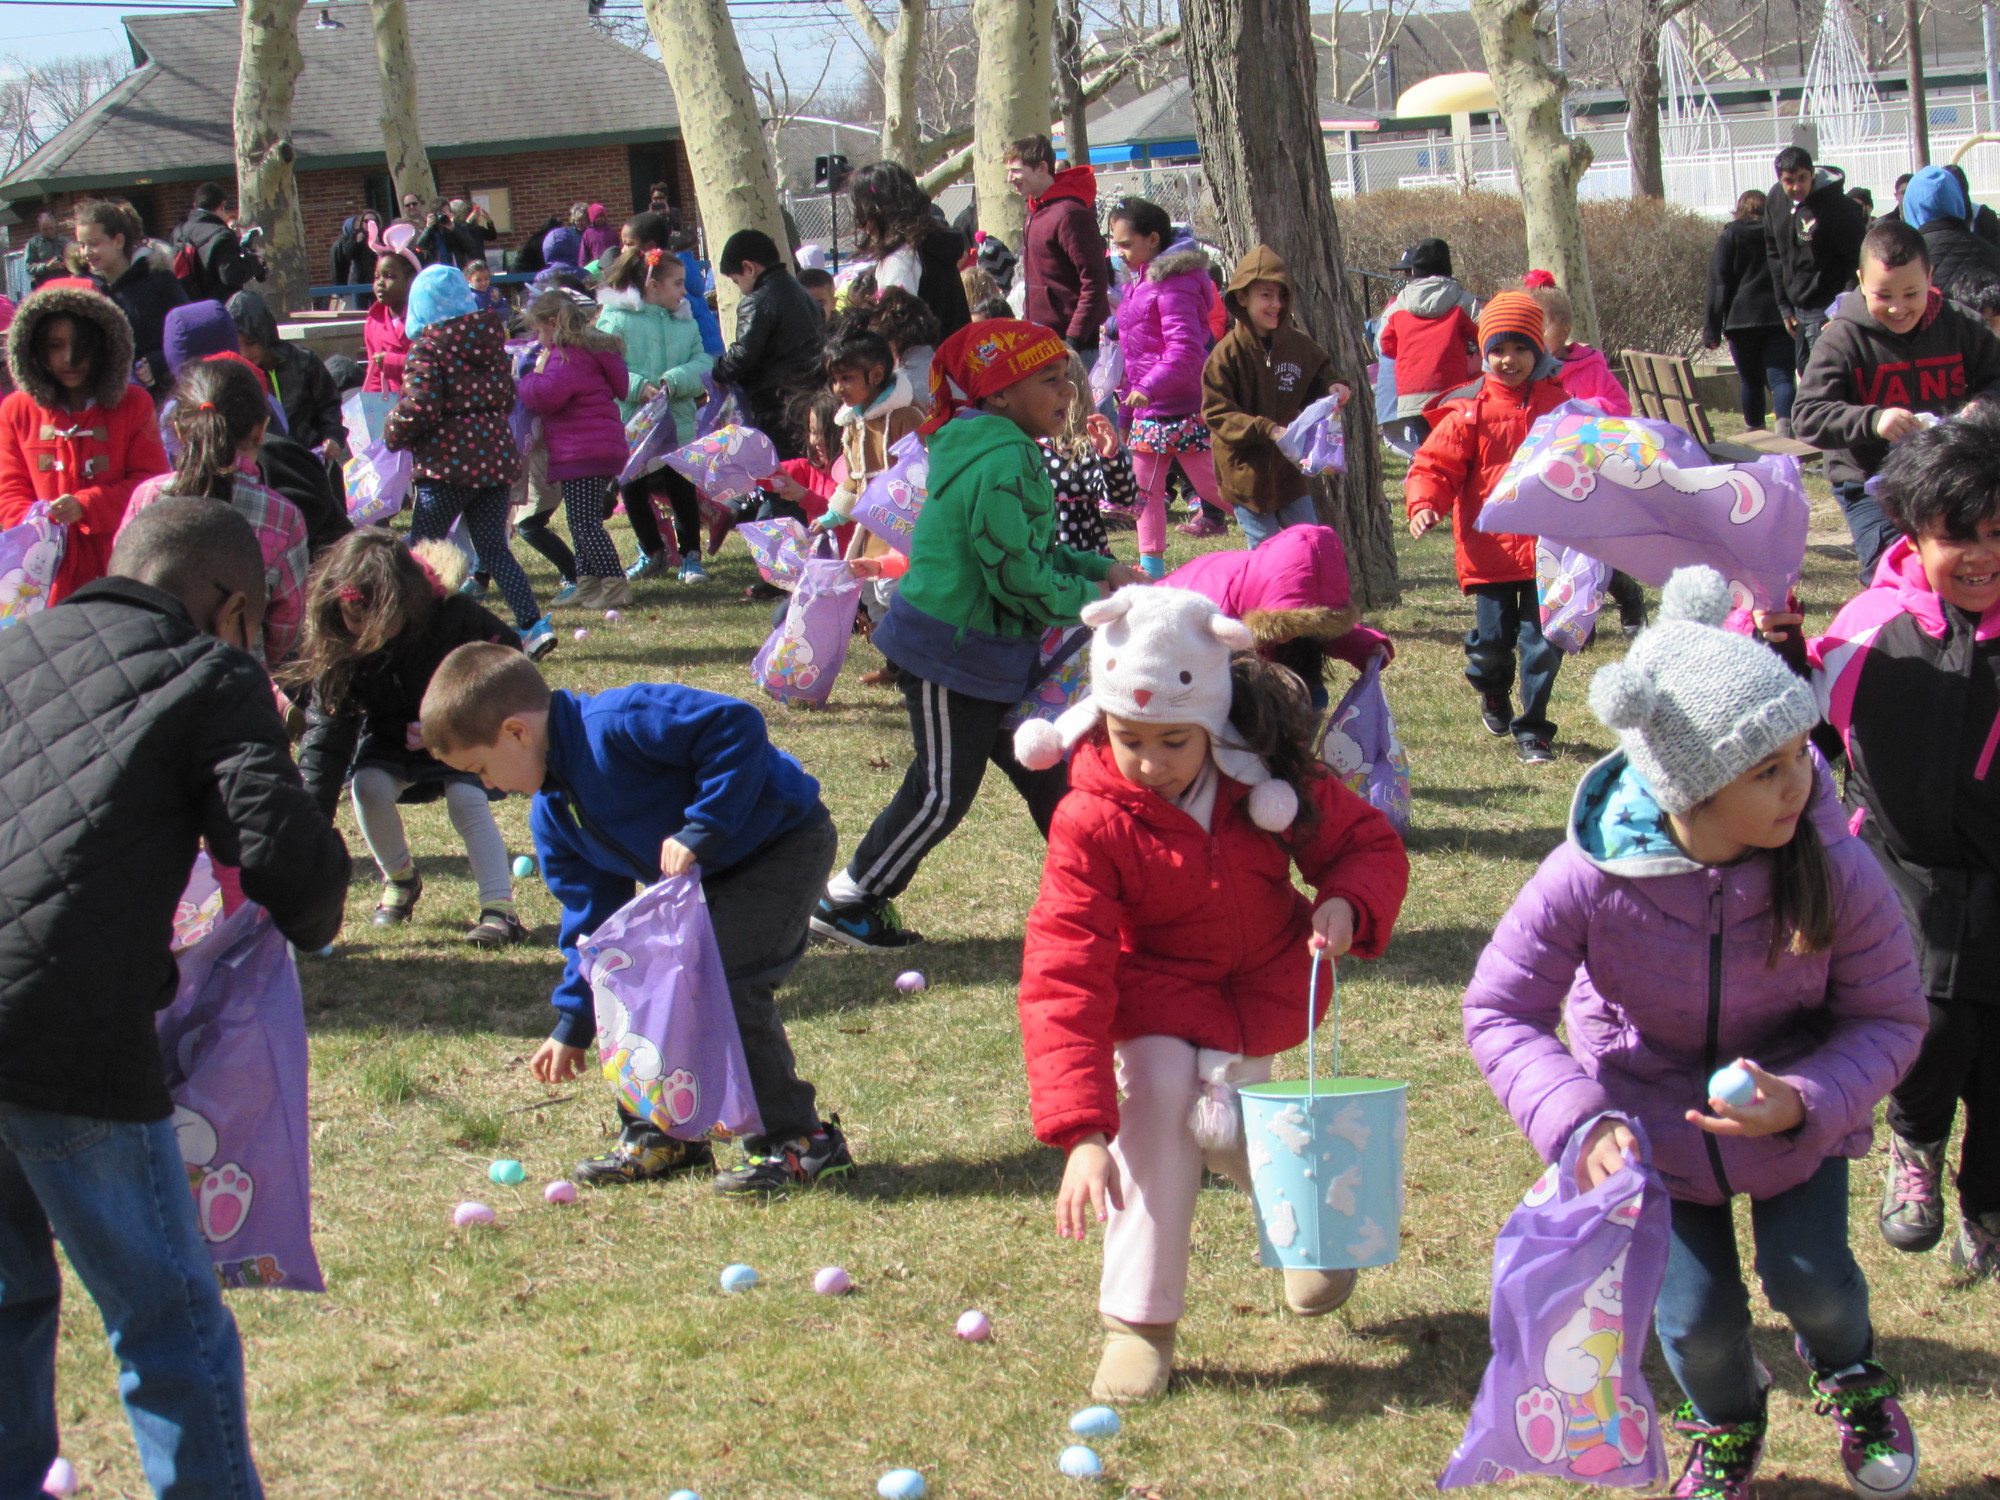 Children made a run for the eggs that were strewn around the grass.